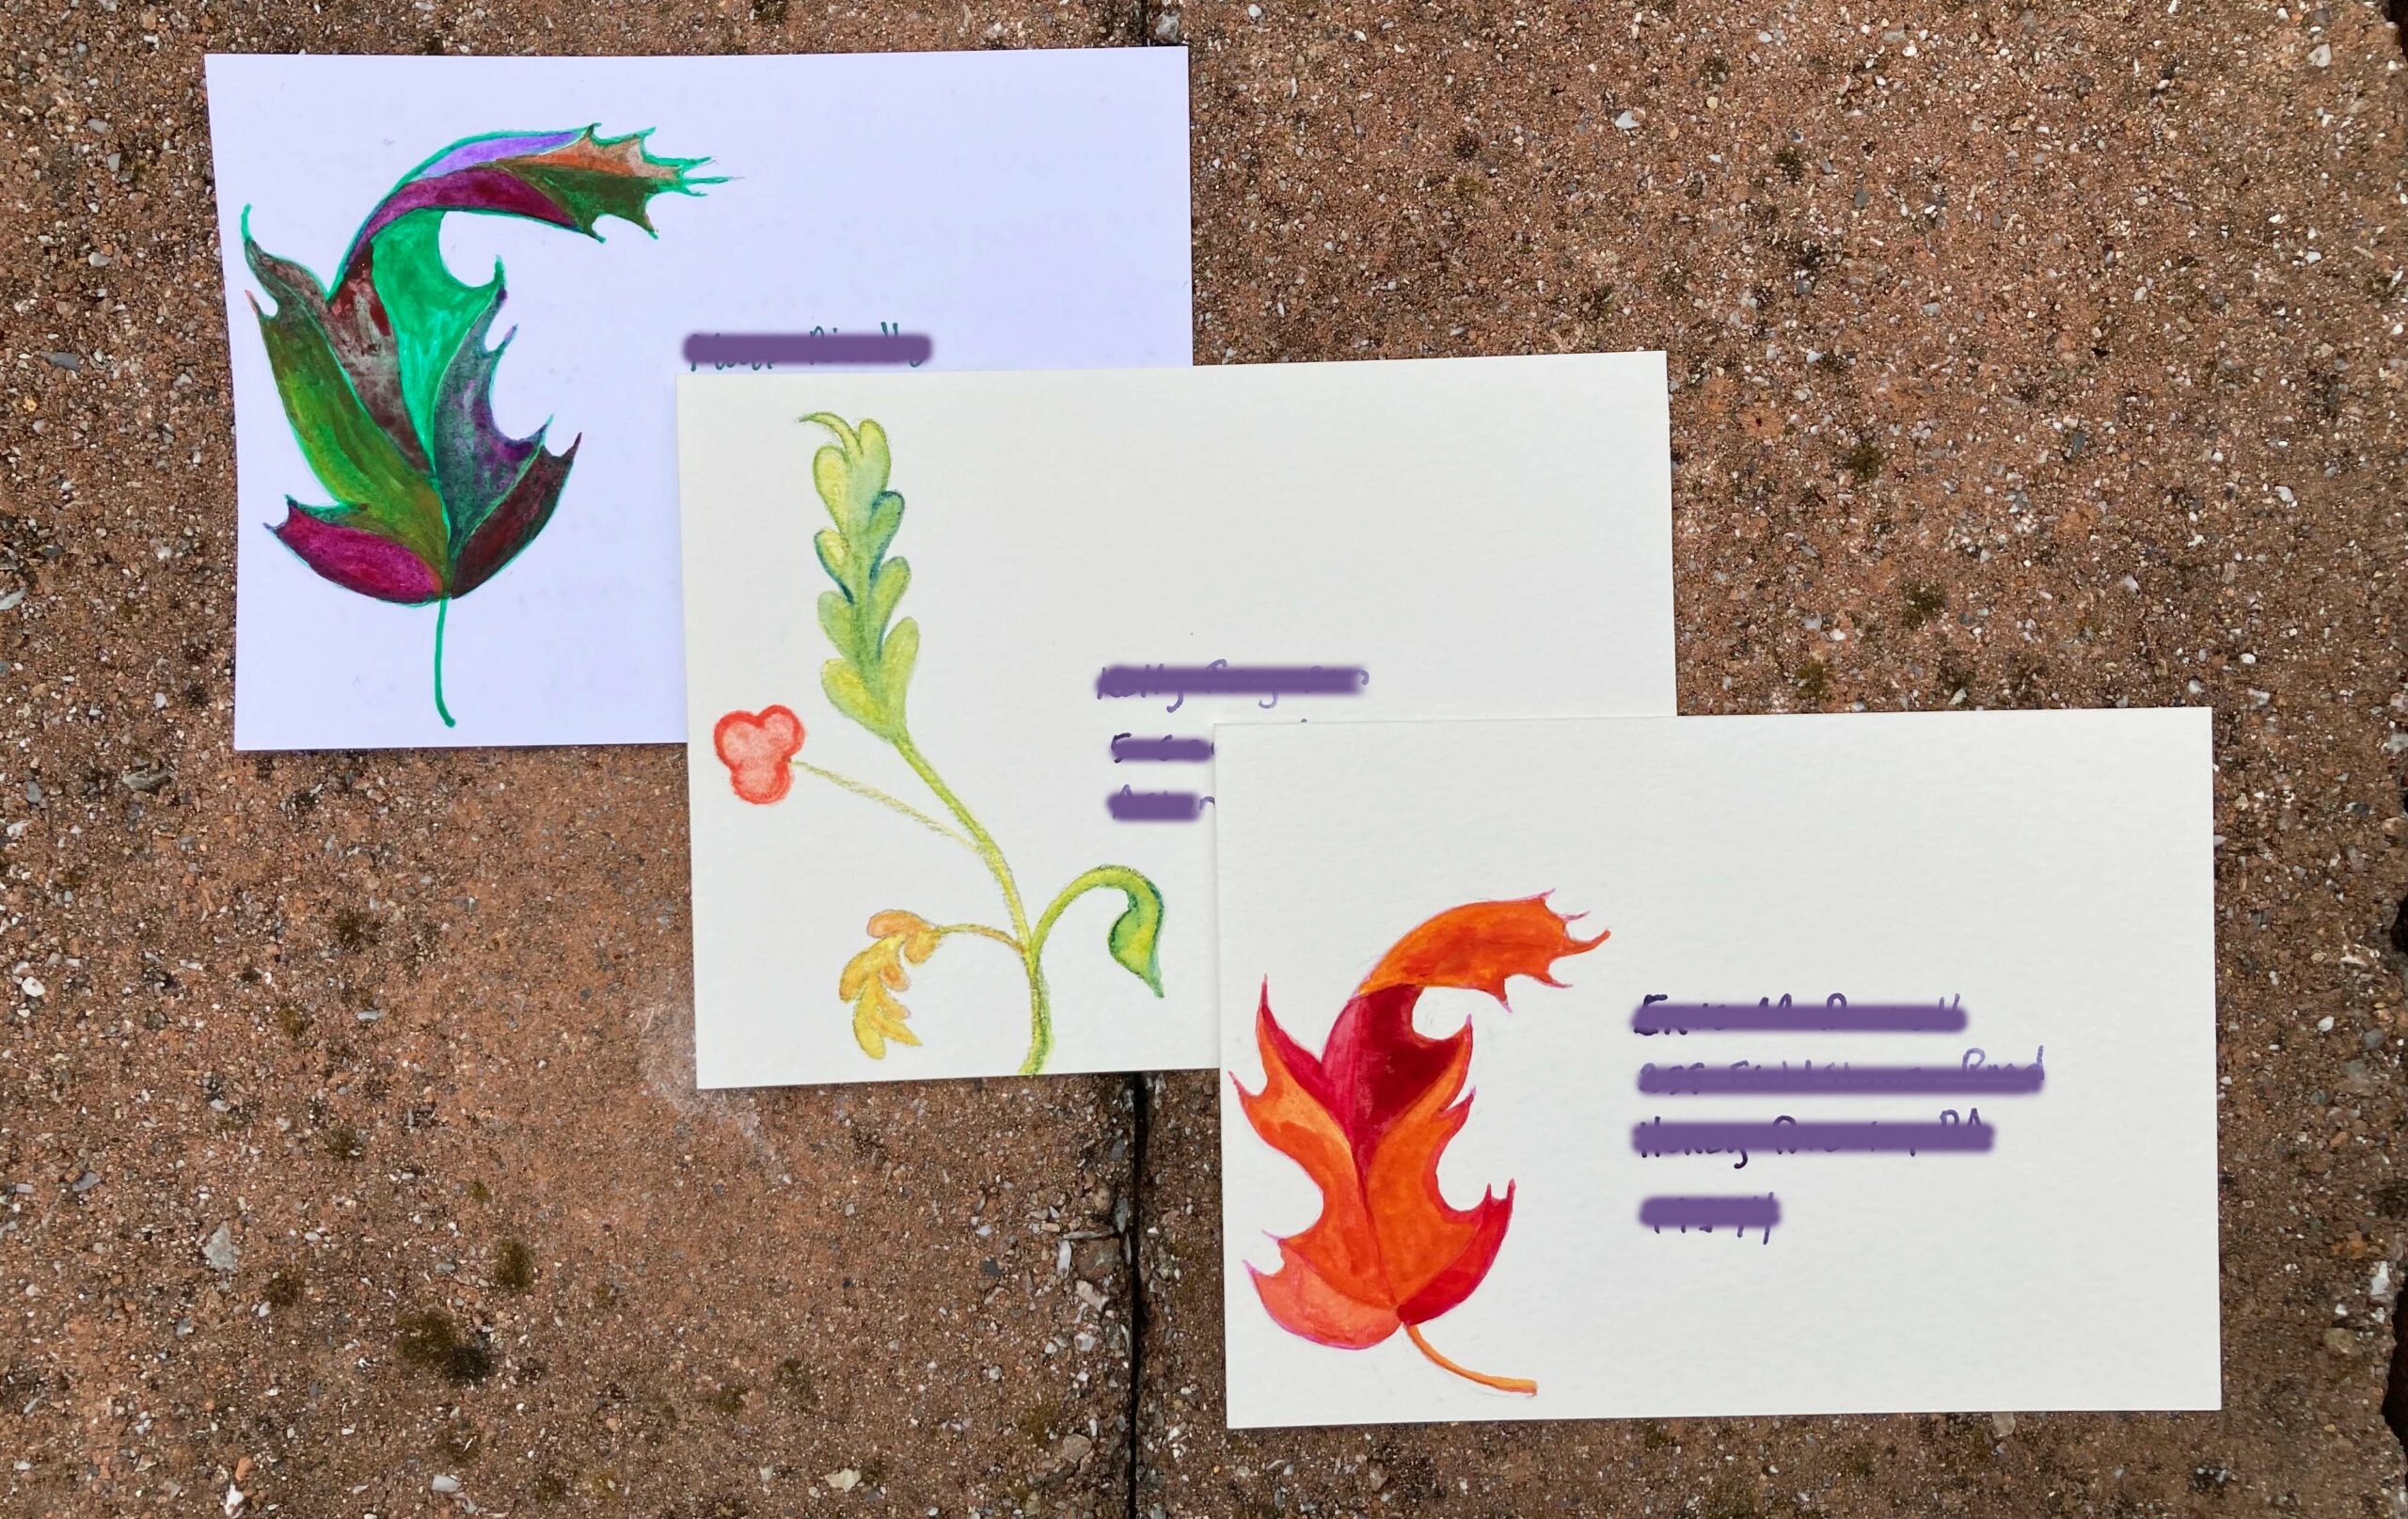 Three postcards on a brick wall, address side up, in a cascade from top left to bottom right. The first has a fall oak leaf with disparate colors (green, dark crimson, gold, purple), the second a stylized floral motif, and the third another leaf, this time in gold, orange, and crimson. The recipient information is obscured.